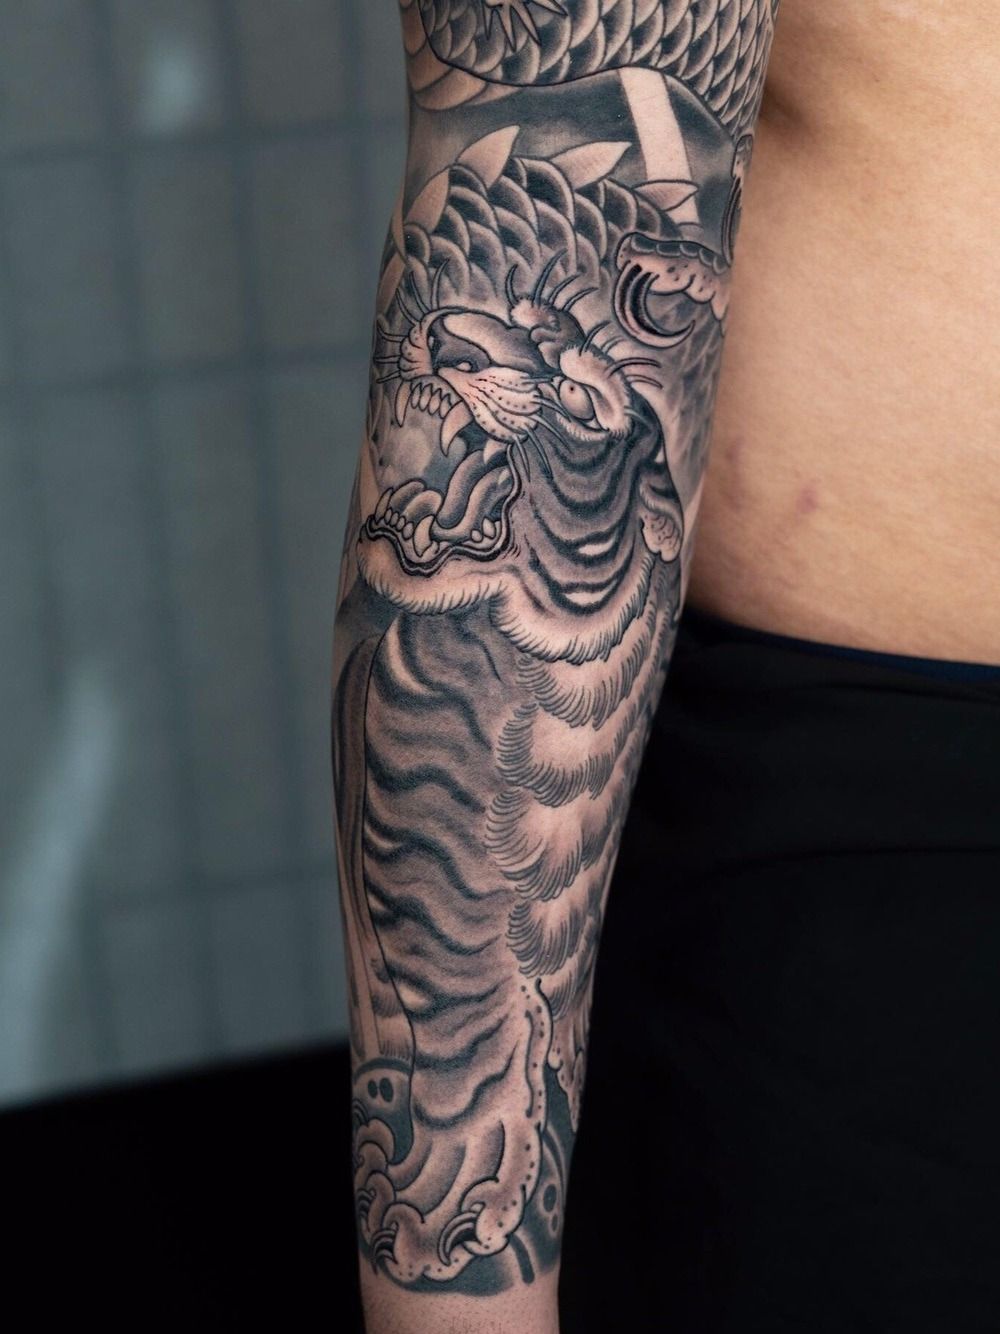 Leighs Tattoo and Commission Artwork  Outside section to this dragon vs  tiger japanese oriental inspired sleeve I was set the challenge to  incorporate geo and mandala work throughout this sleeve as